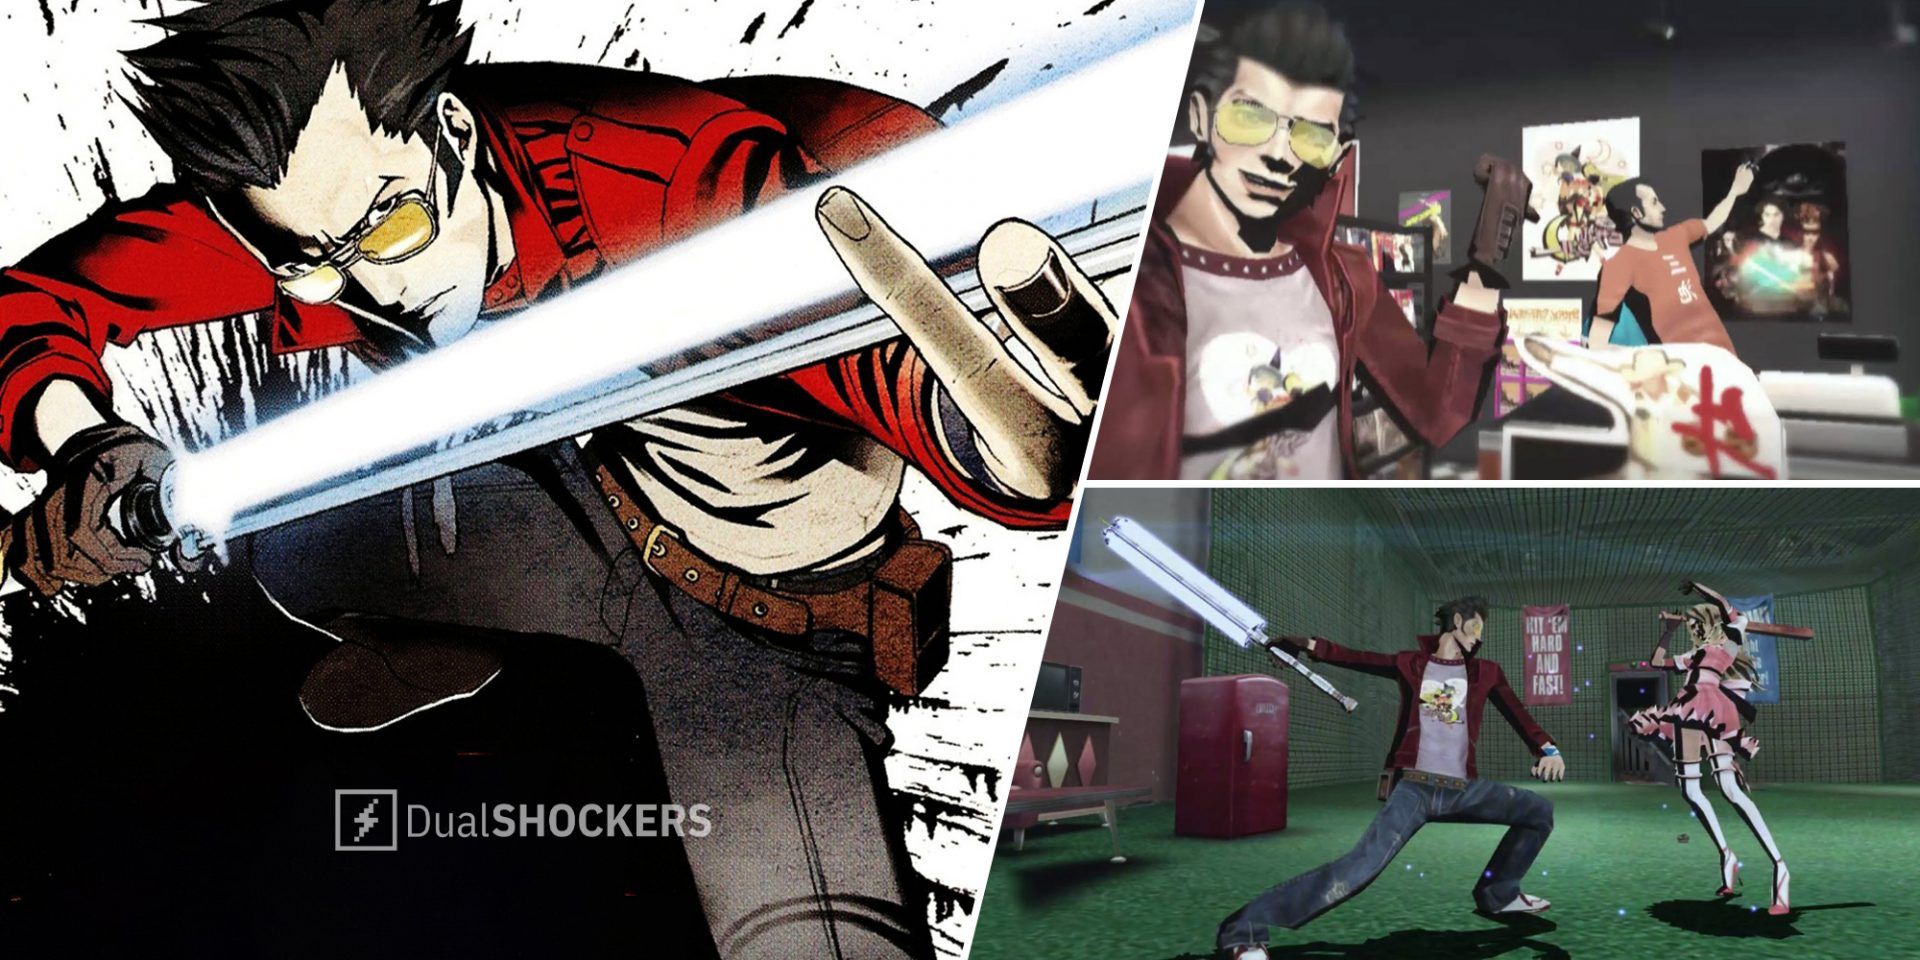 No More Heroes cover art on left, No More Heroes Travis Touchdown on top right, Travis Touchdown fighting on bottom right